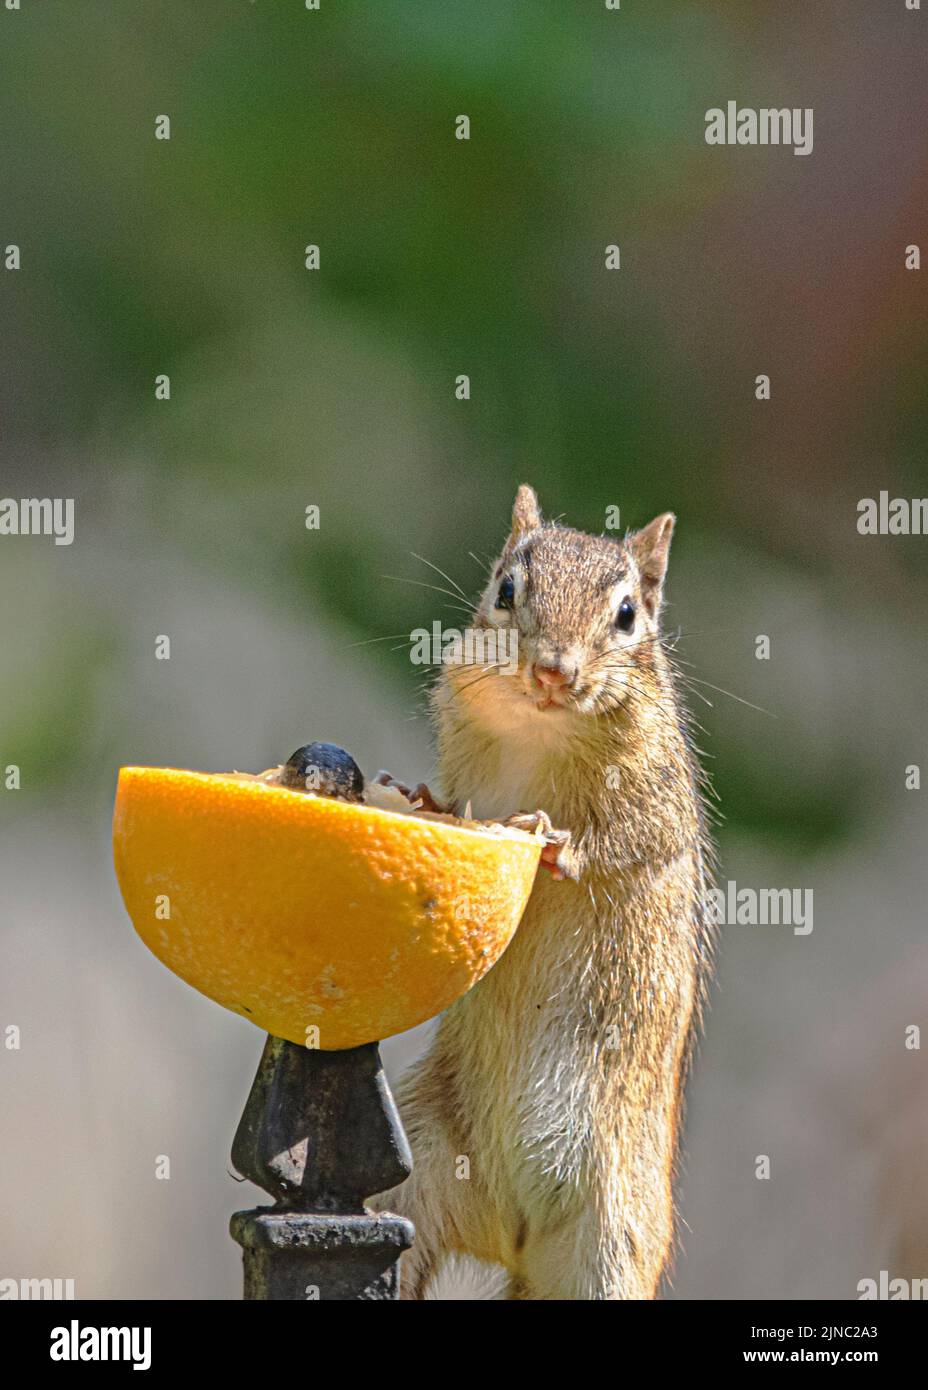 Thye cutest chipmunk eating oranges and looking into camera. Stock Photo